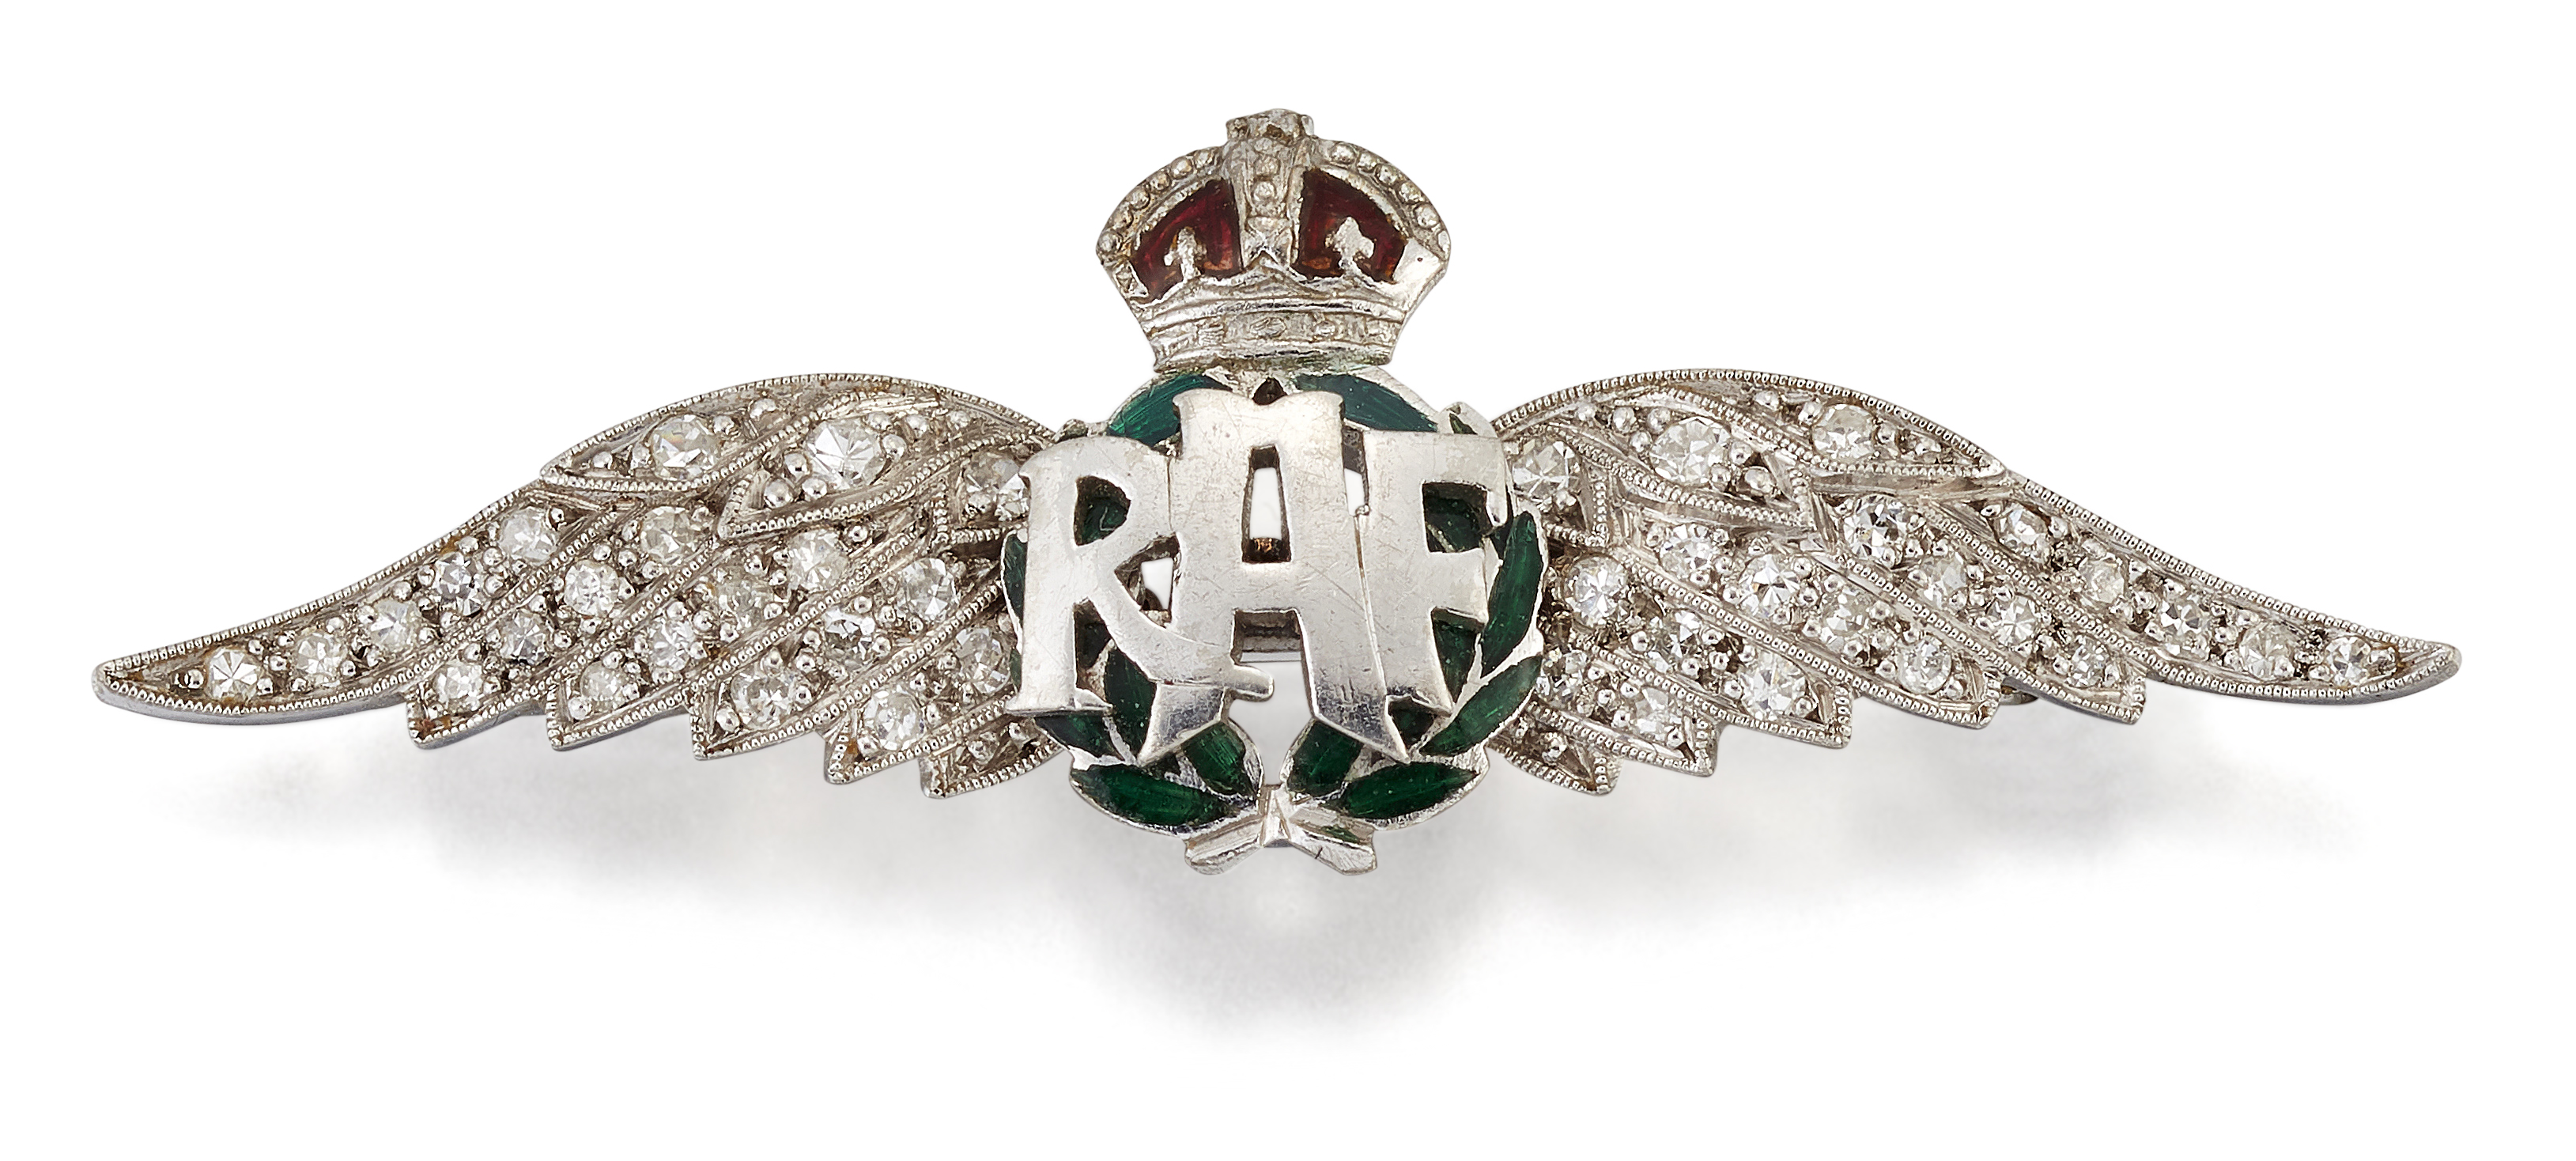 A DIAMOND AND ENAMEL ROYAL AIR FORCE WINGS SWEETHEART BROOCH - Image 2 of 2